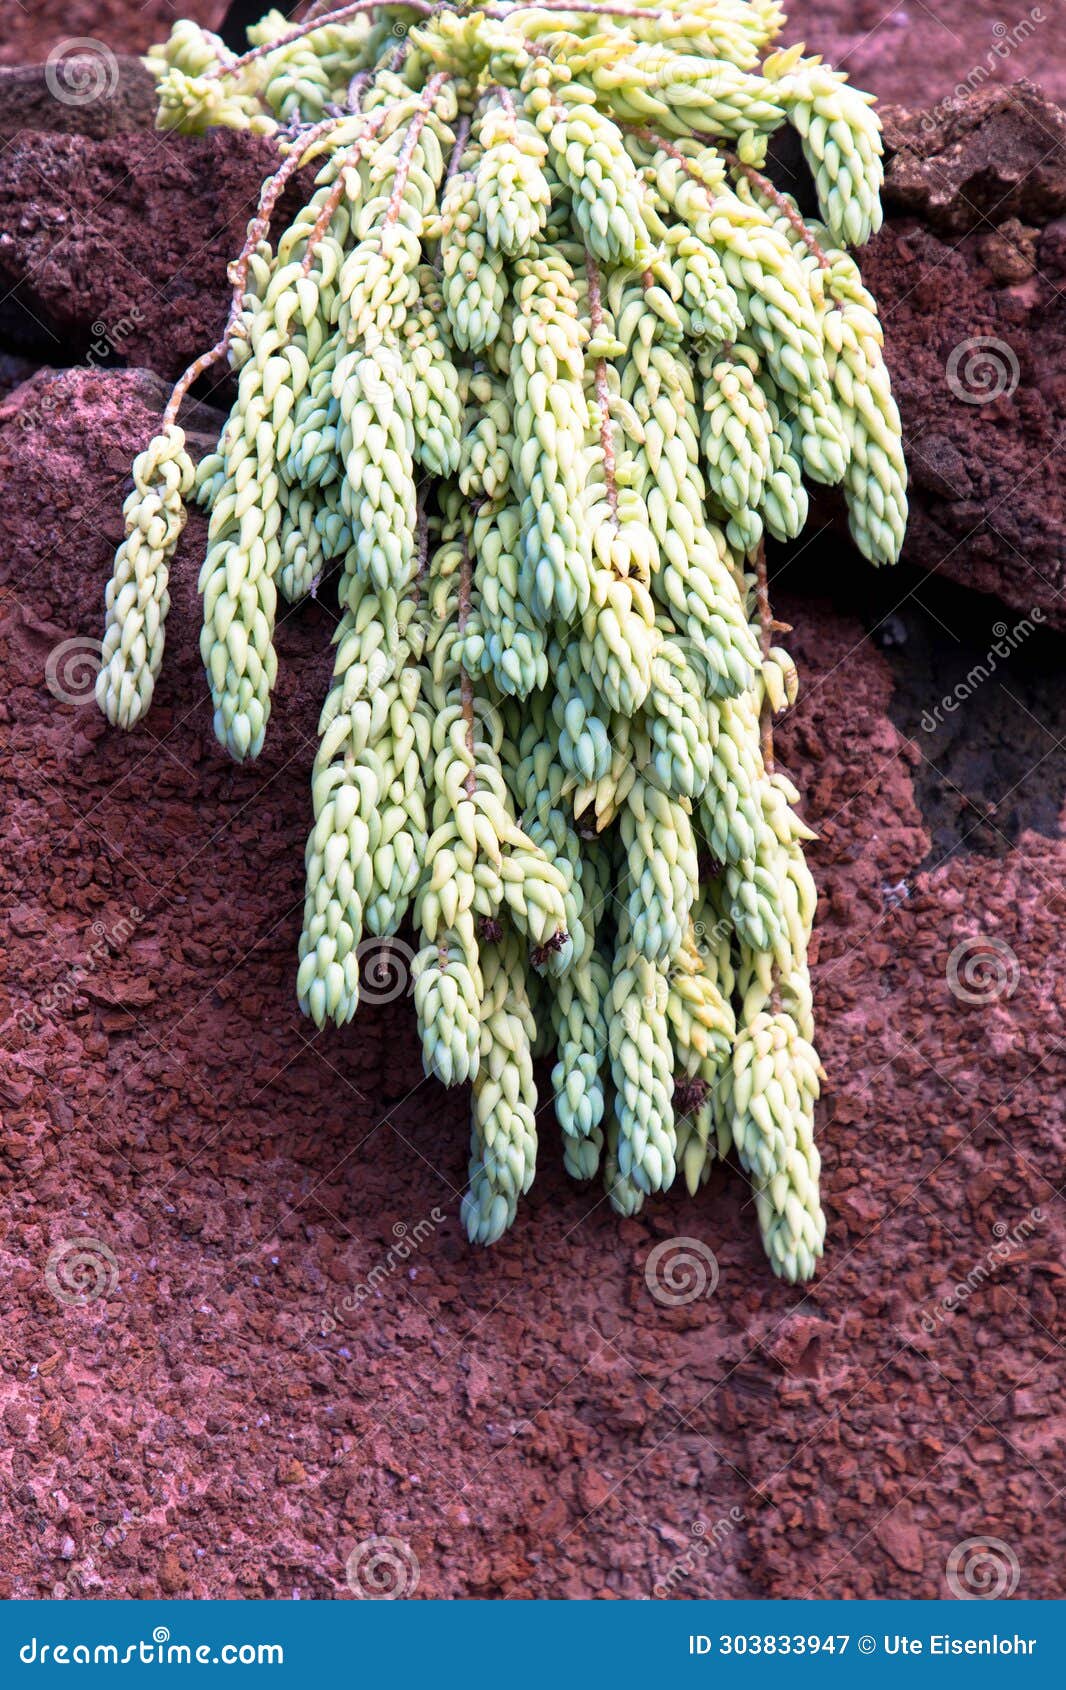 cactus in canary islands.